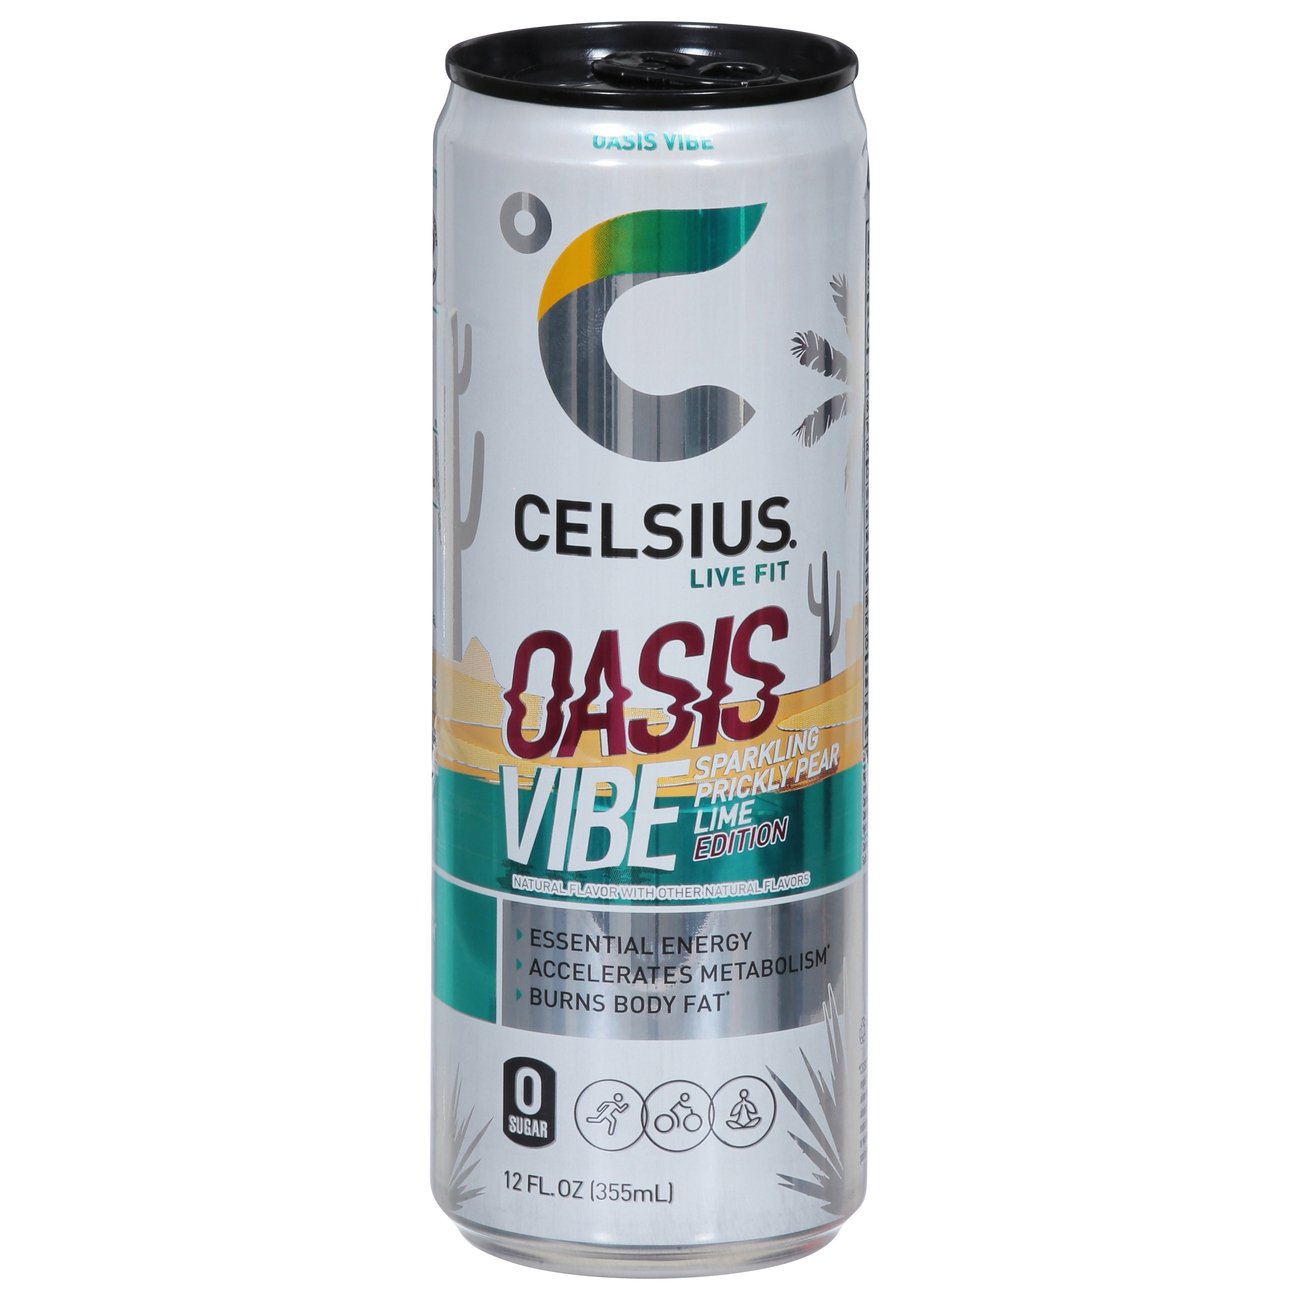 Celsius Oasis Vibe Sparkling Drink - Prickly Pear Lime Edition - Shop ...